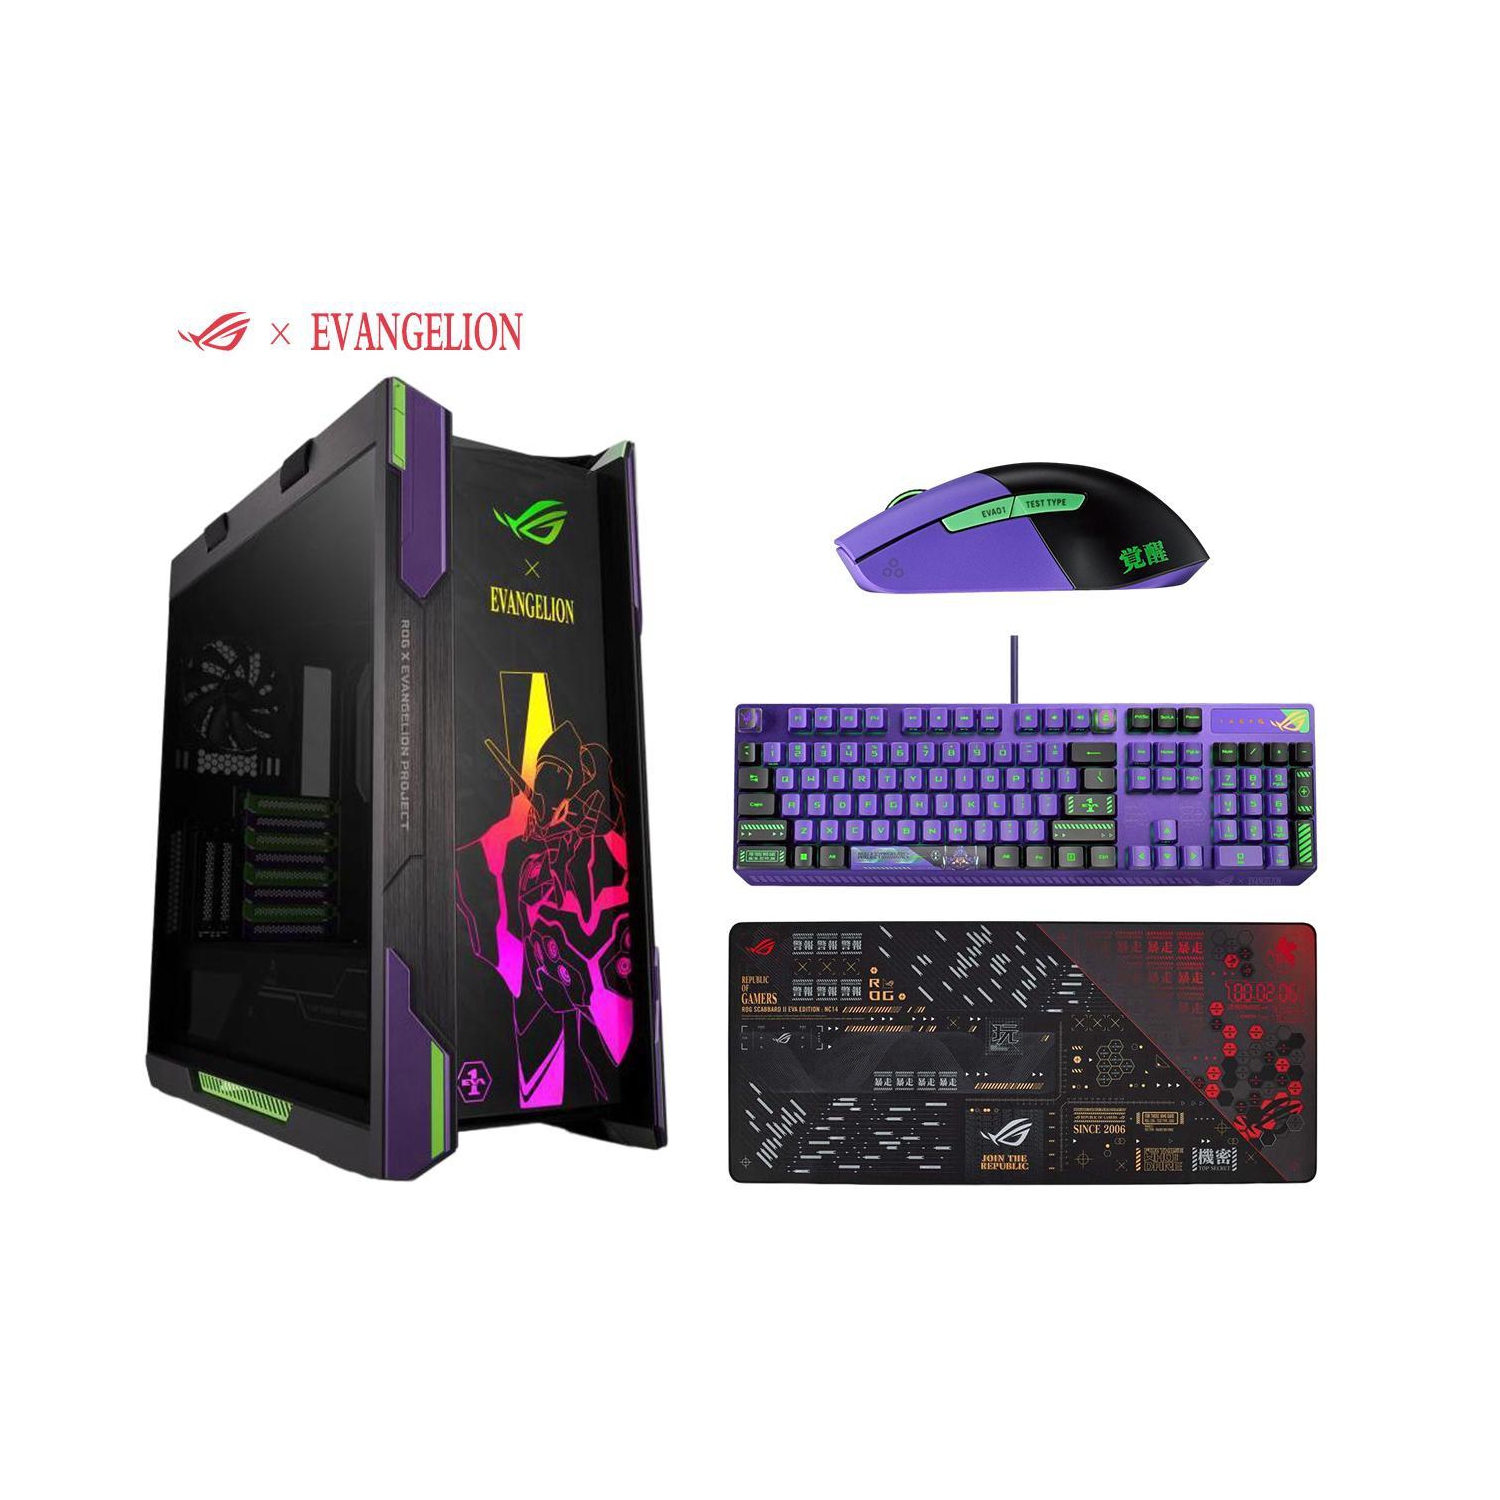 ASUS ROG Strix Helios GX601 EVA RGB ATX Mid-Tower Computer Case& ROG Strix Scope RX EVA RGB Gaming Keyboard & Keris Wireless Mouse &Scabbard II Extended Mouse Pad Combo- Evangelion